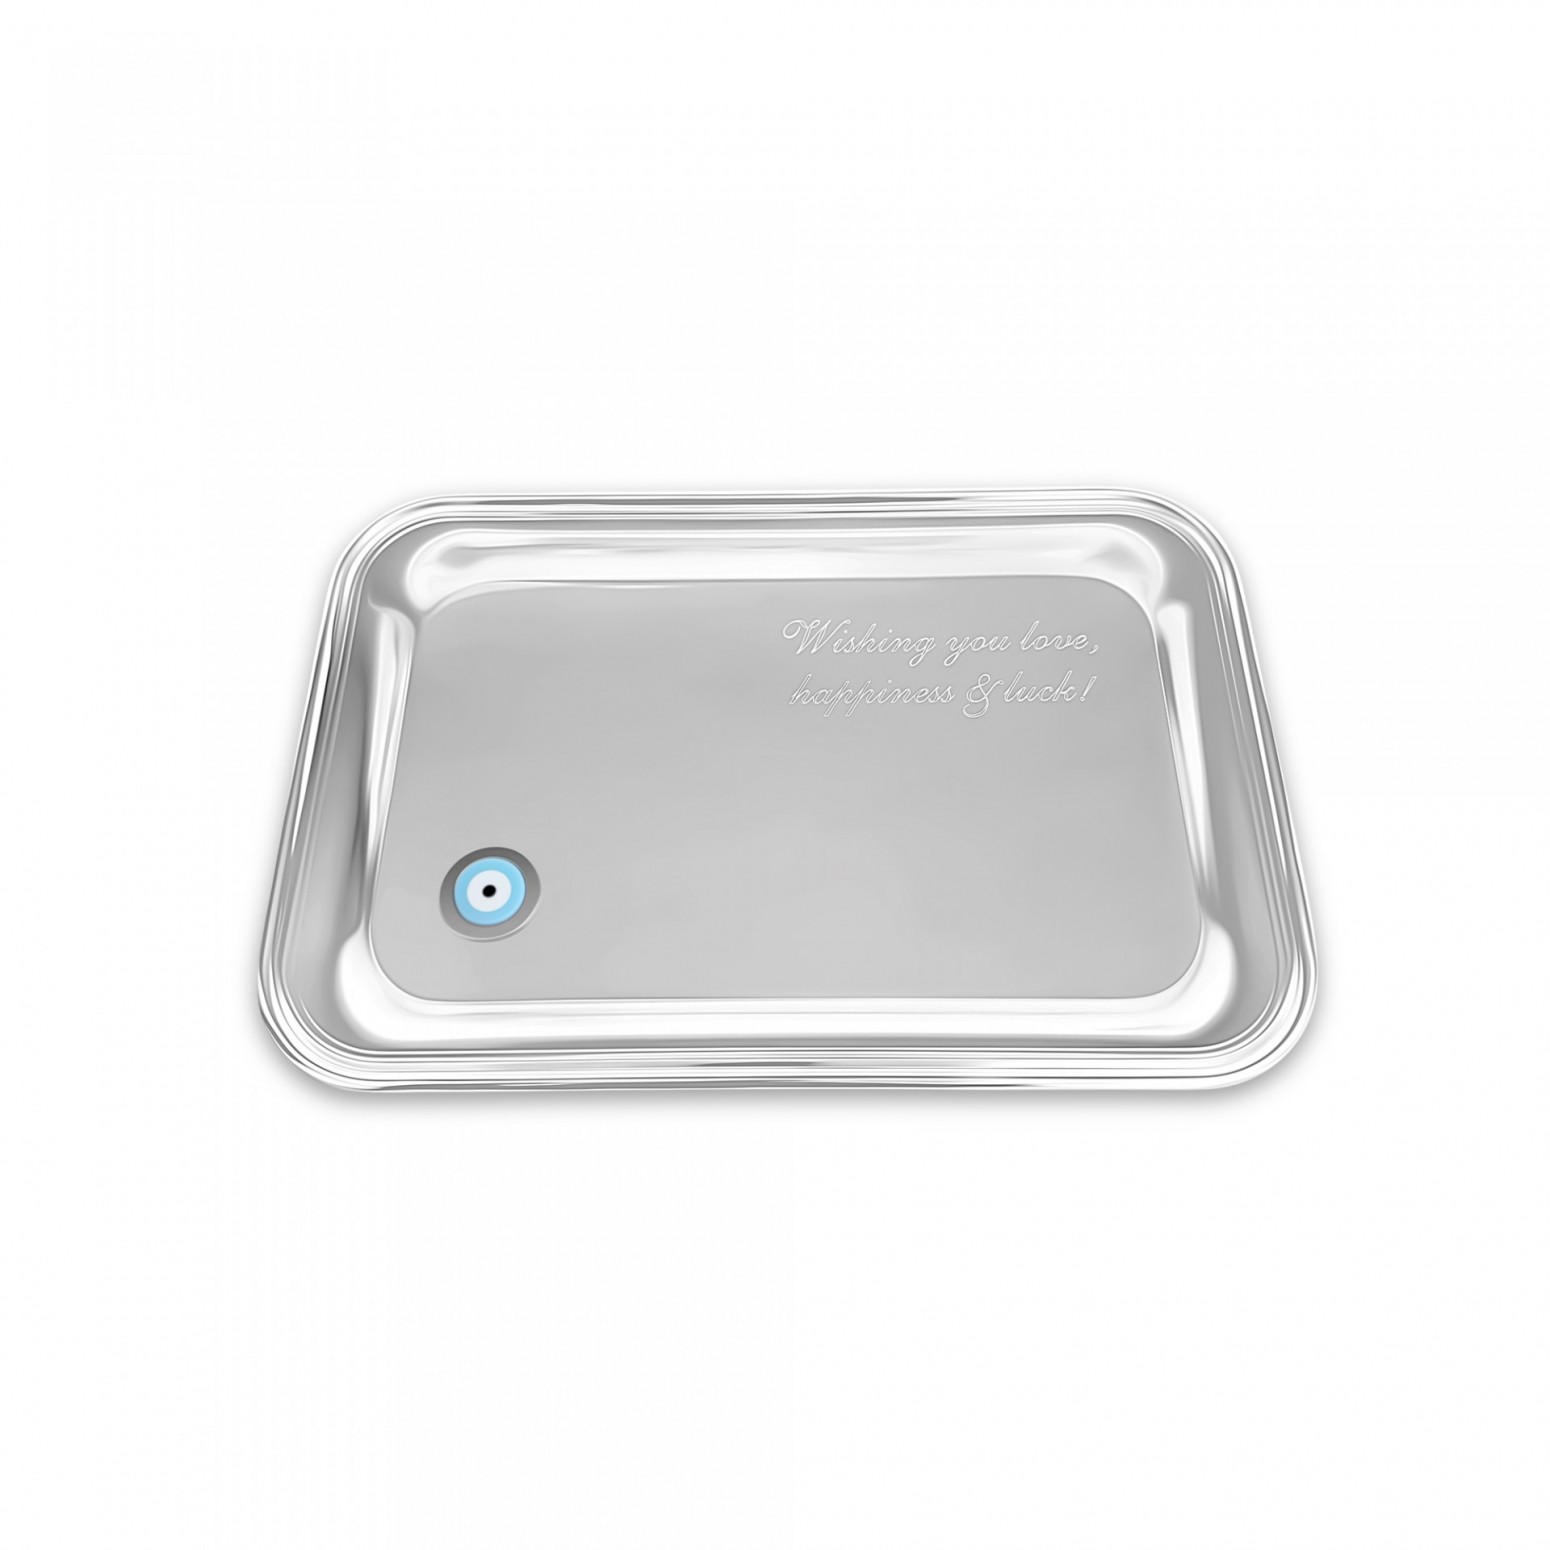 Silver plated tray with wishes, corian eye and inox, ac1667 GIFTS Κοσμηματα - chrilia.gr